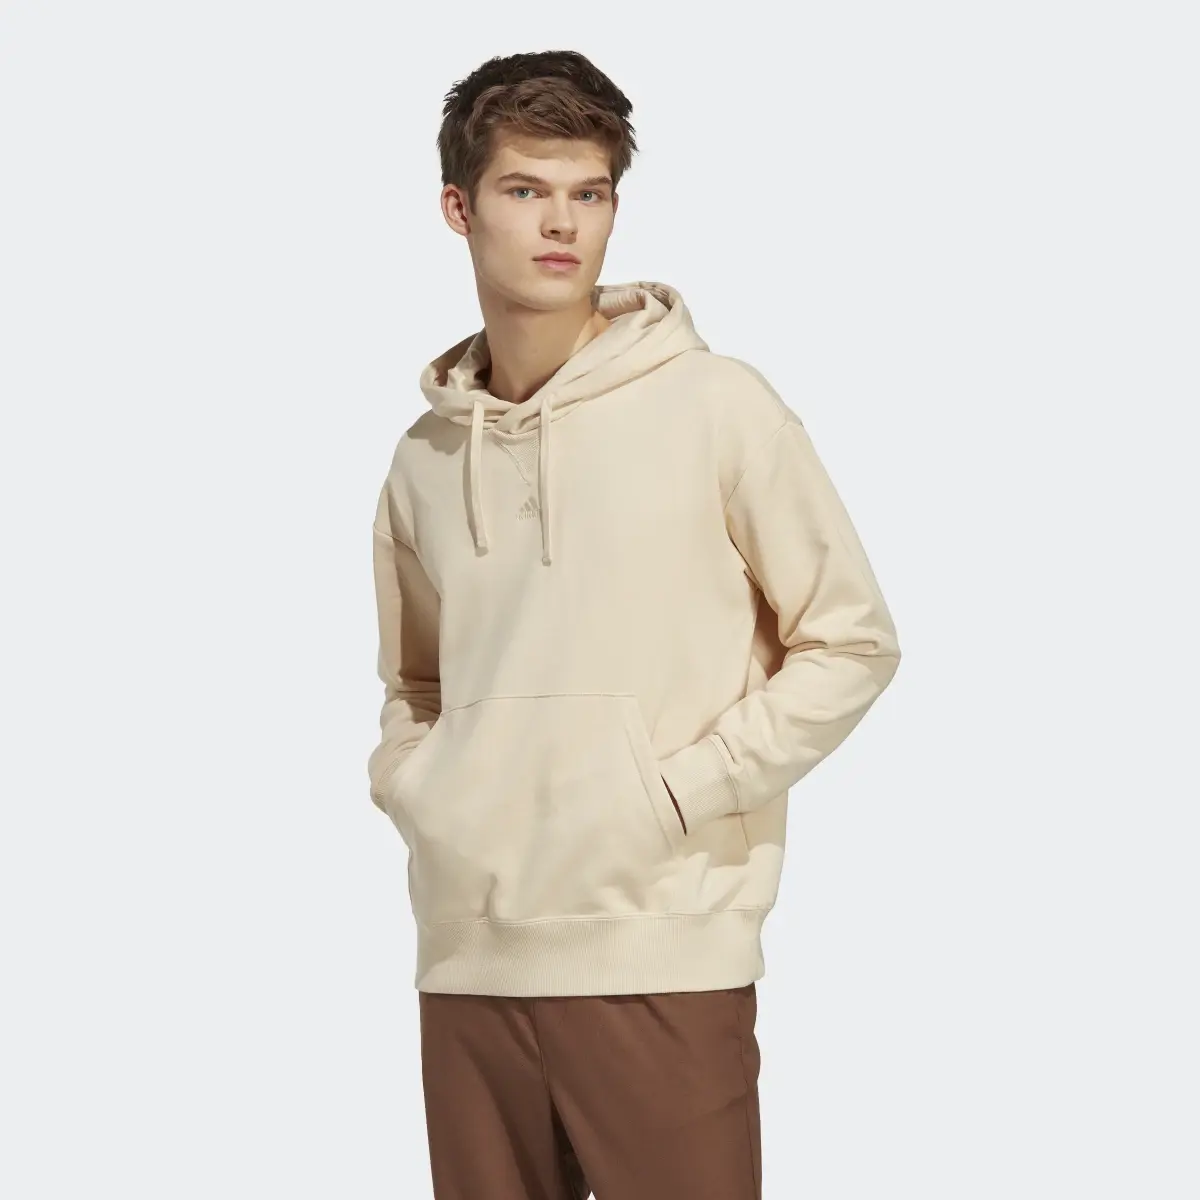 Adidas ALL SZN French Terry Hoodie. 2